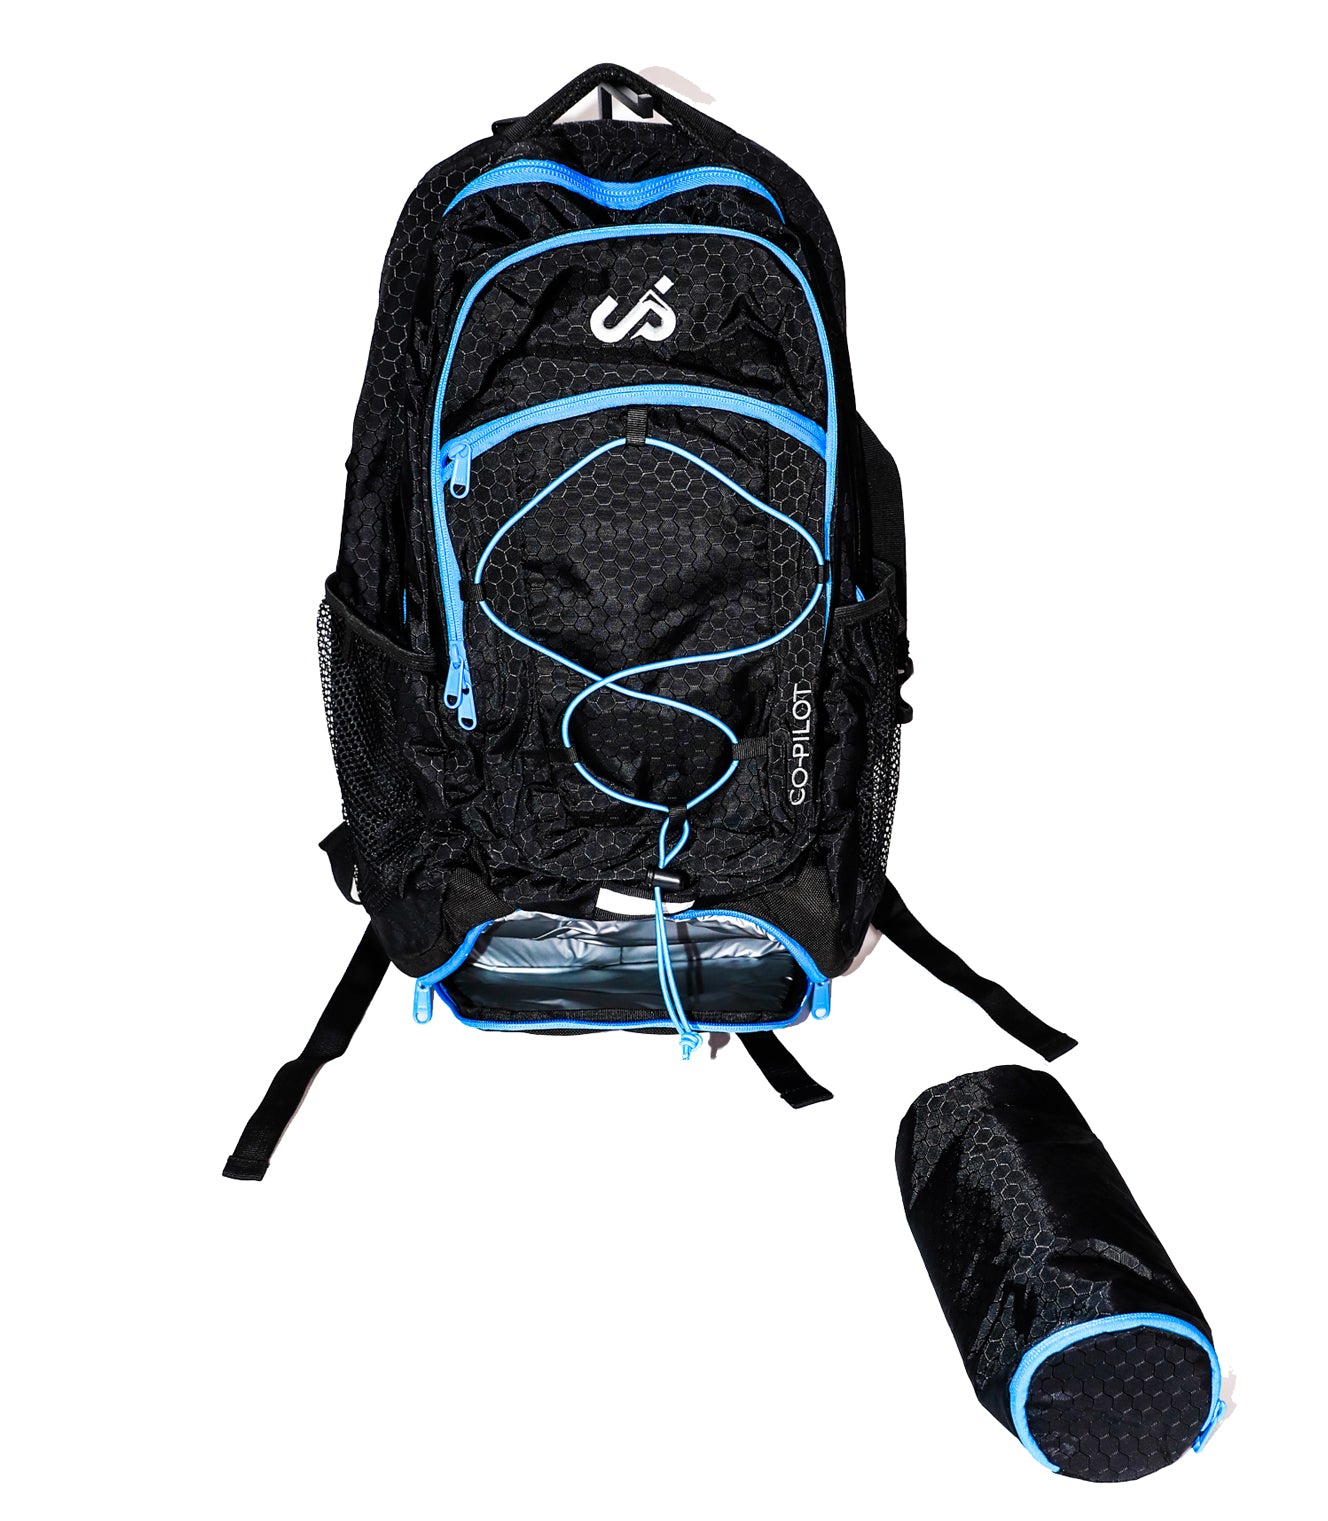 CoPilot CarrierPak - Baby Carrier, Parenting Bag and Day Pack - Black/Blue